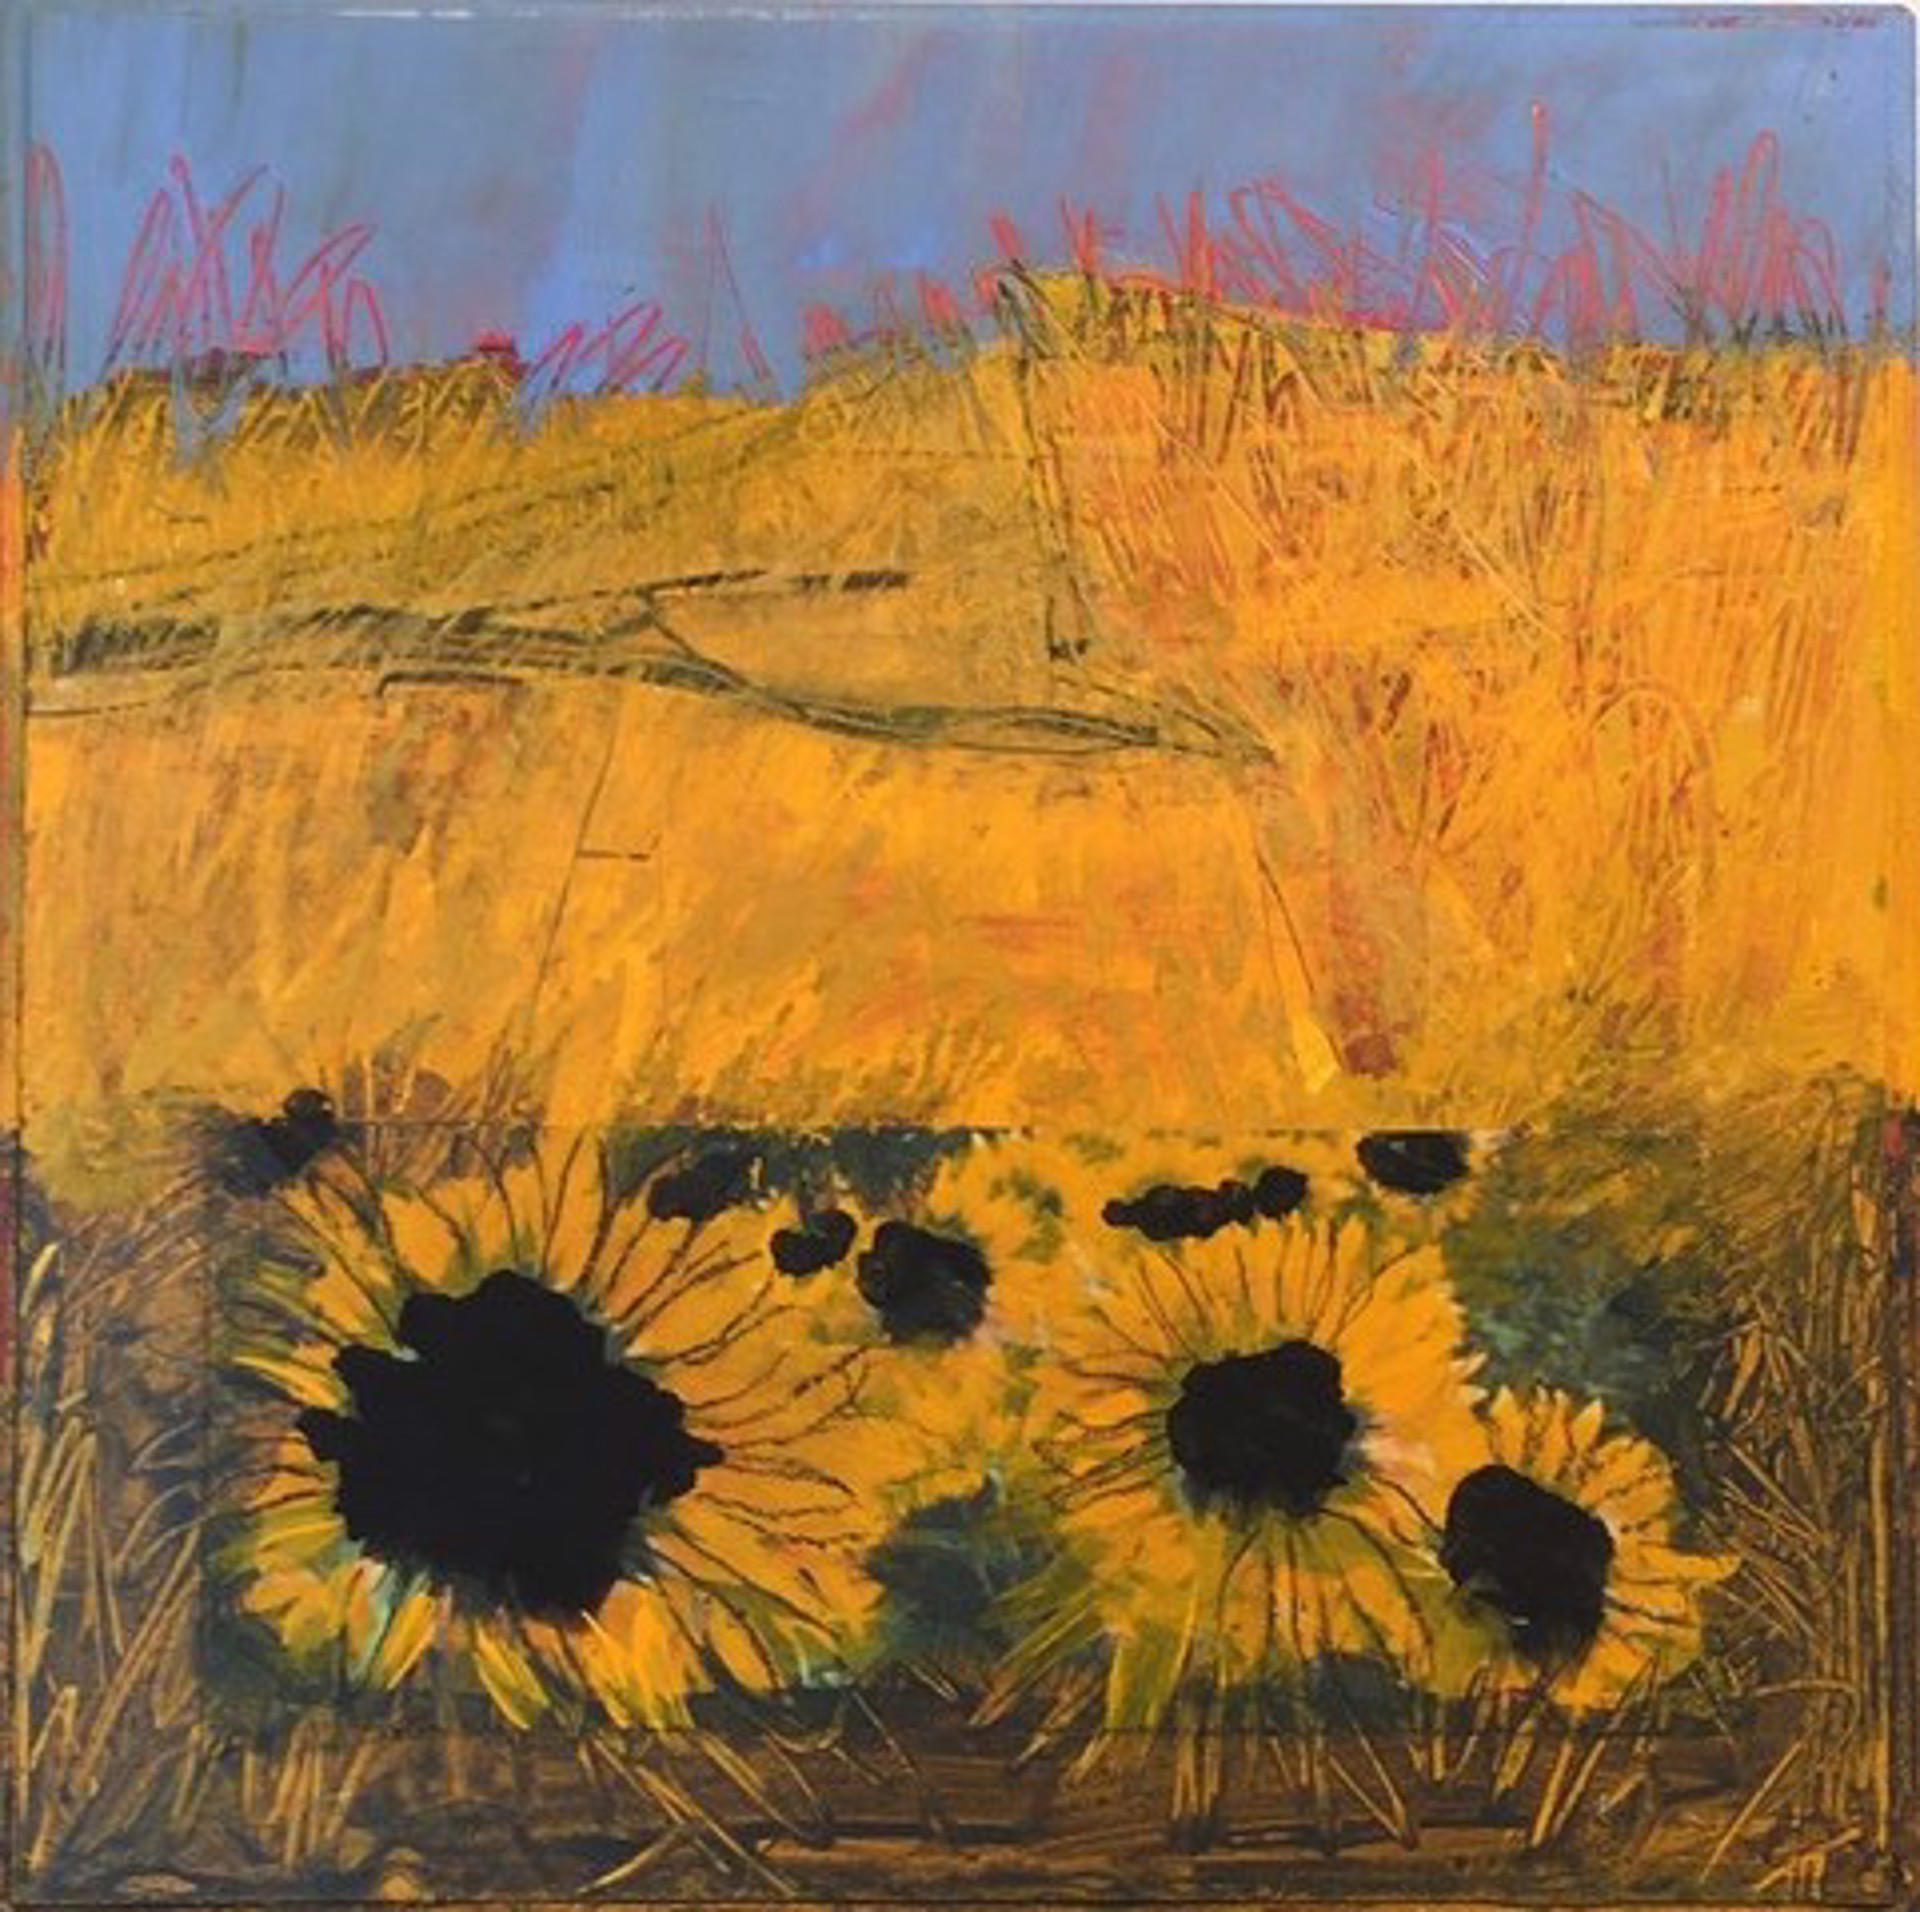 FIELD ABSTRACT by PATRICIA WHEELER